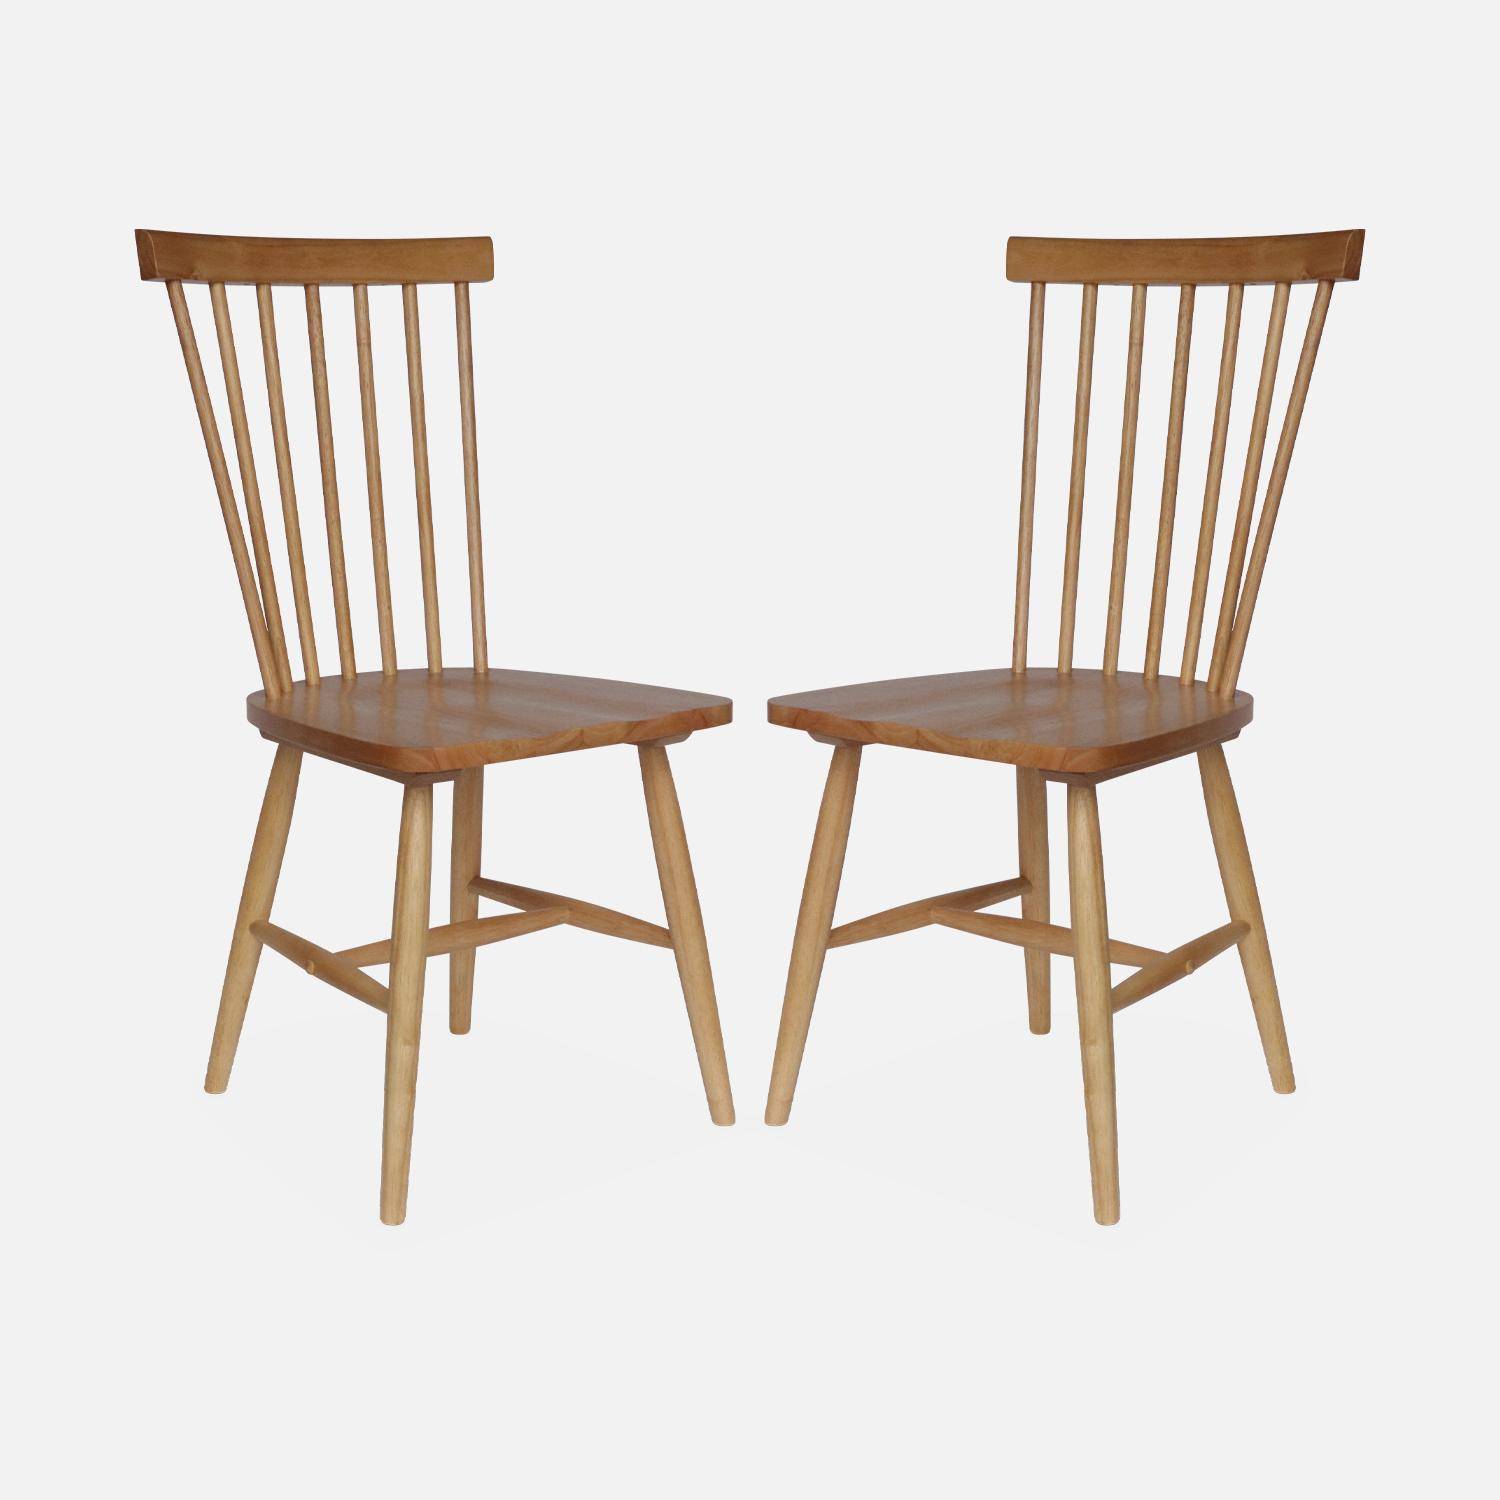 Pair of dining room chairs in Hevea wood,  L49 x W44 x H90 cm, Natural,sweeek,Photo4